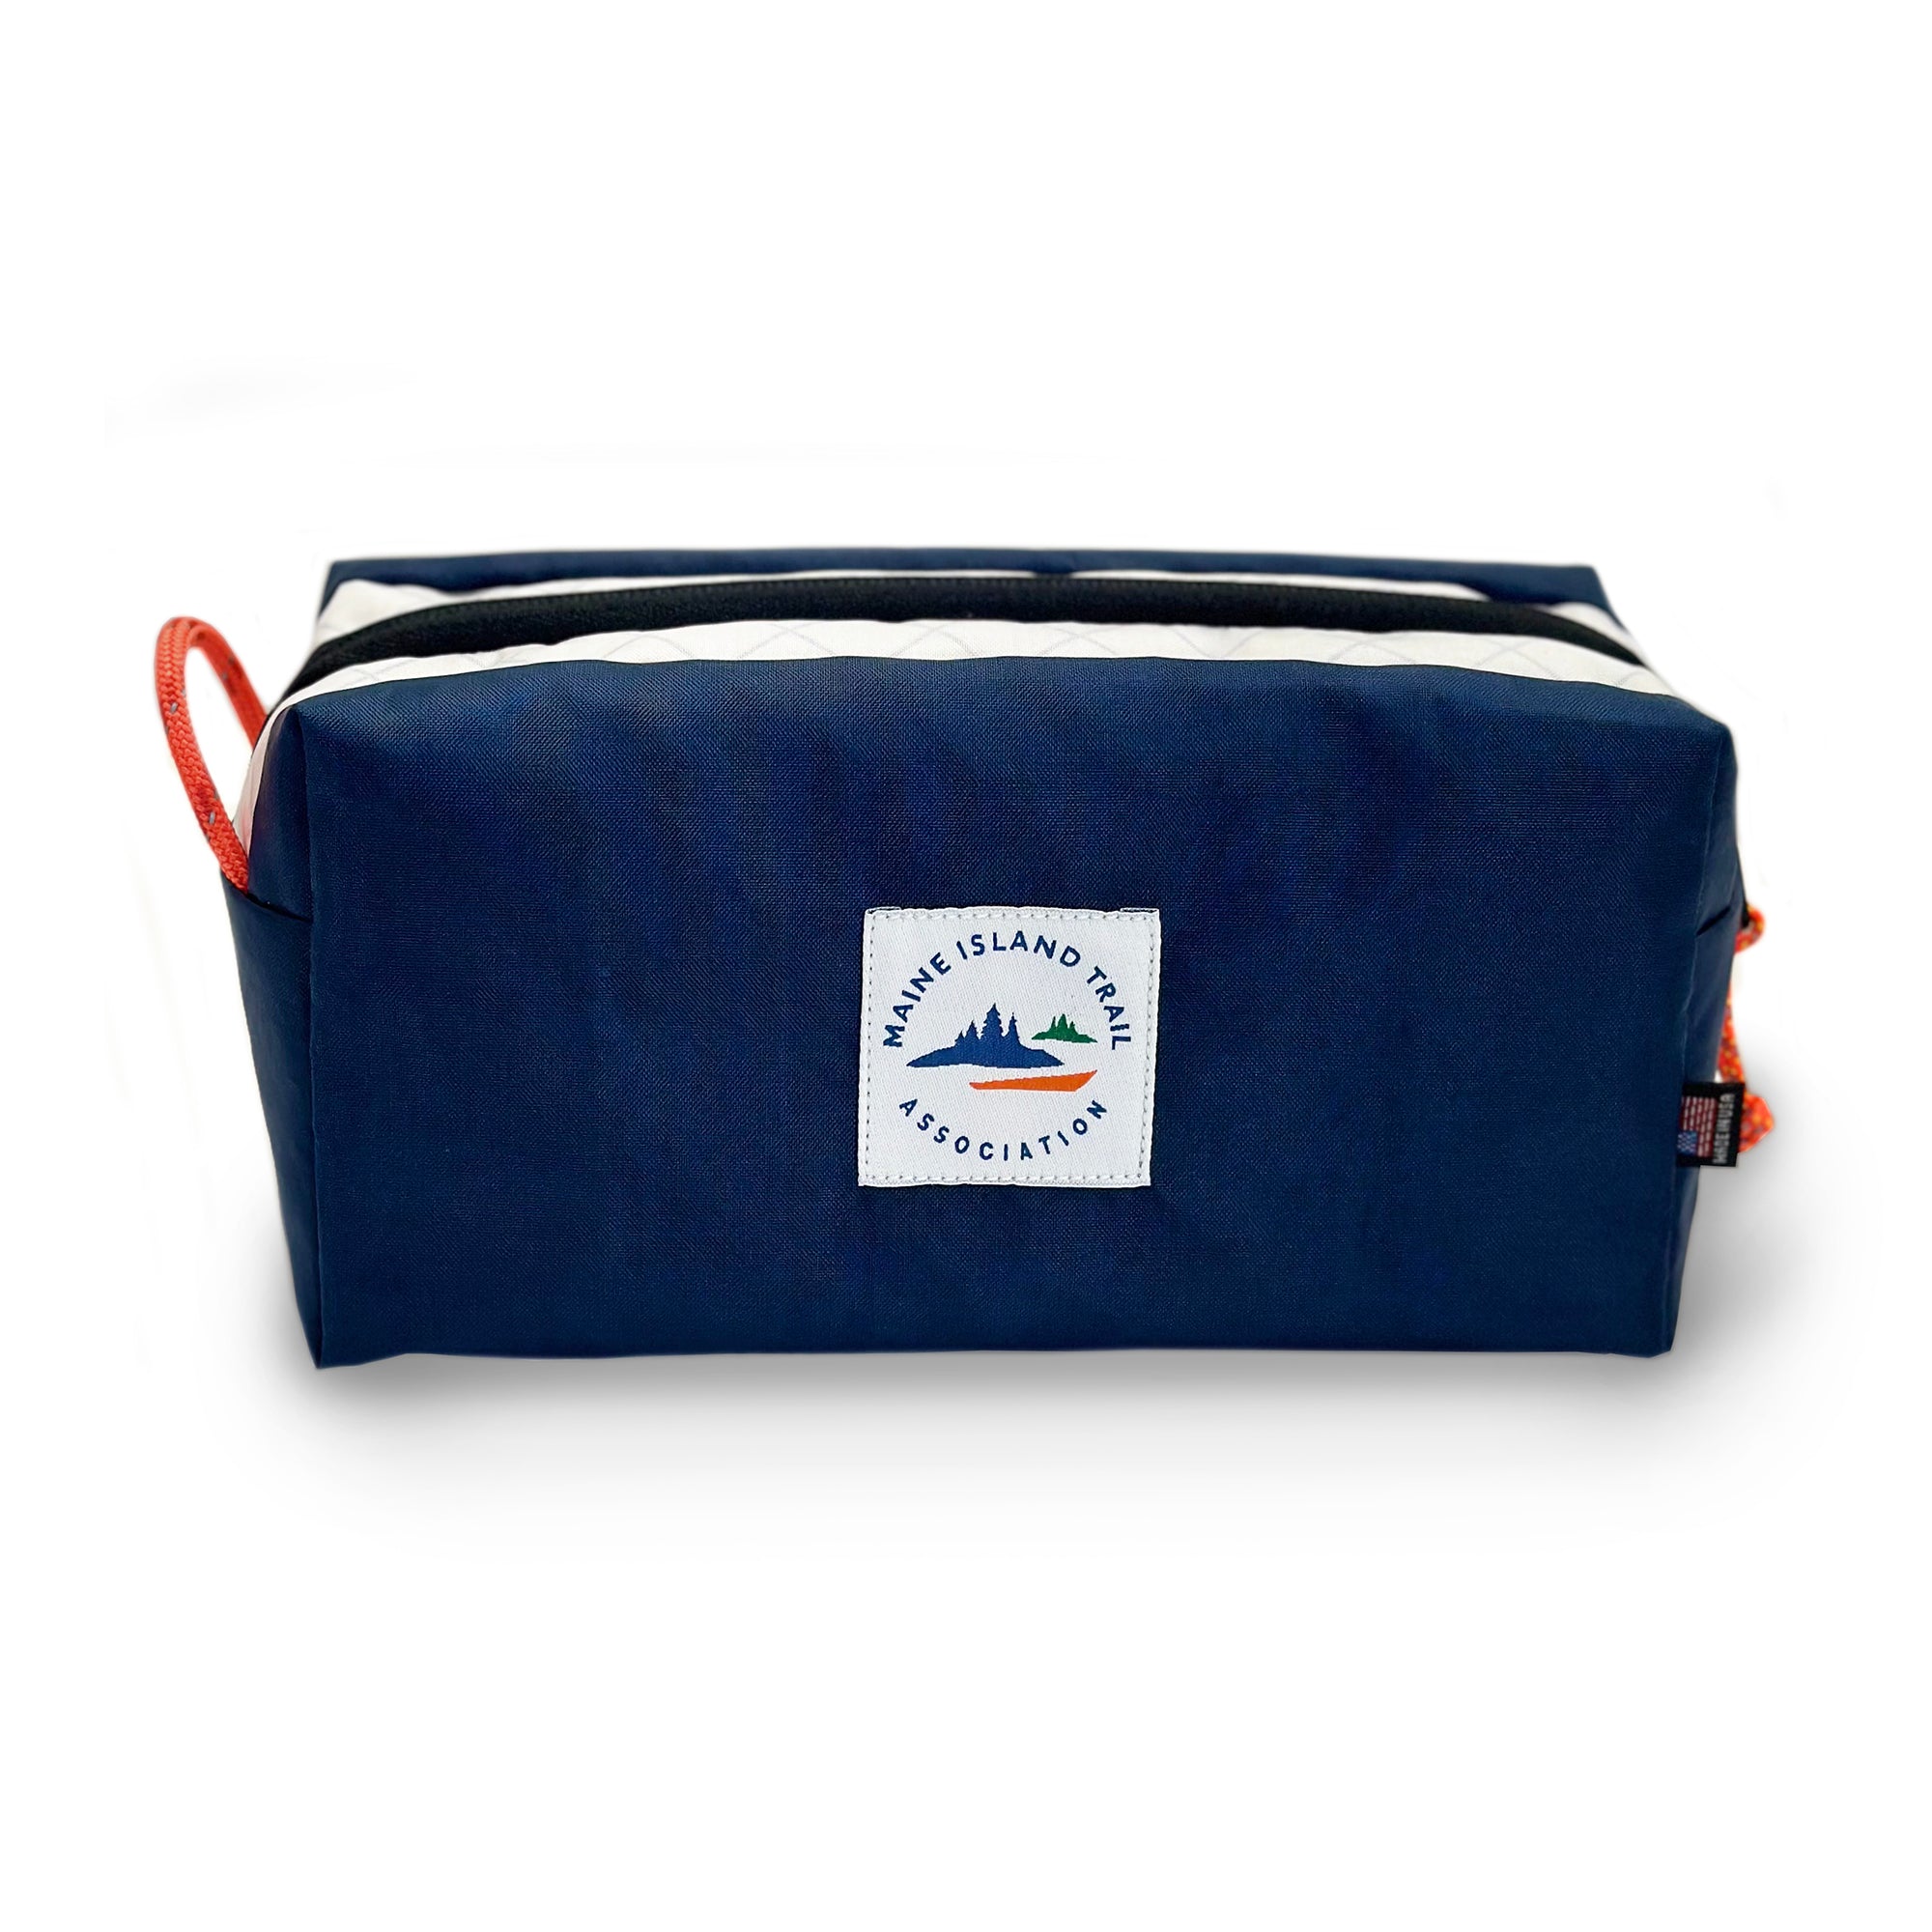 Flowfold Accessories - Laptop Cases, Cord Pouches & Toiletry Bags